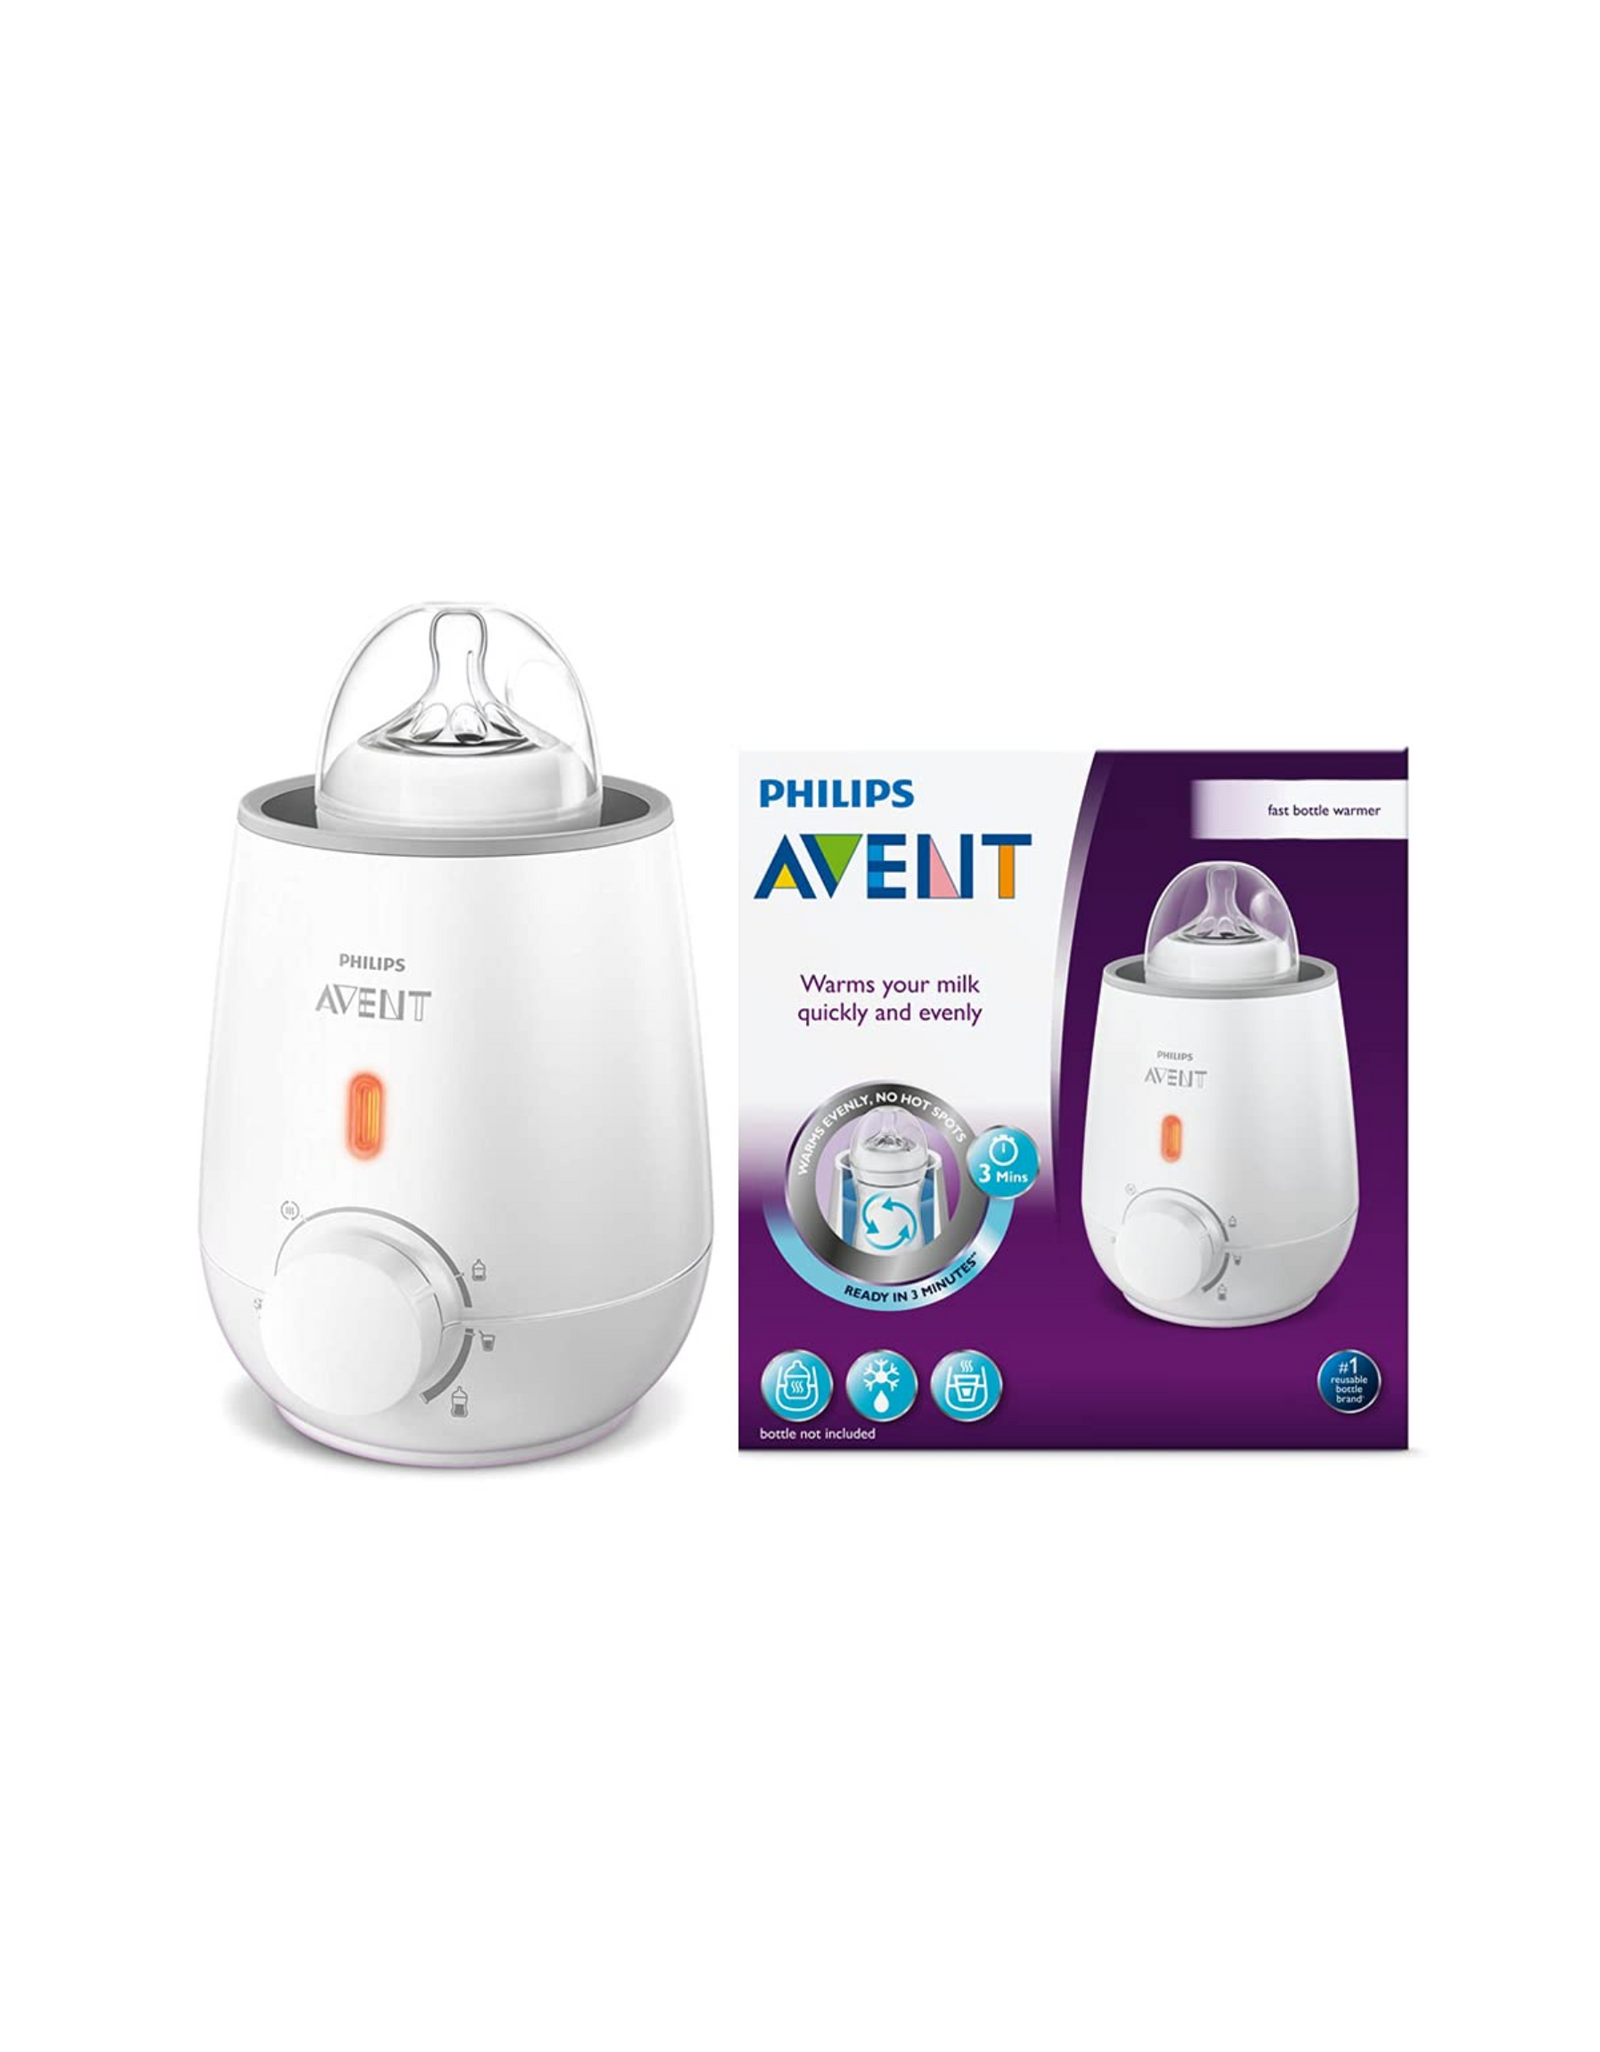 Philips Avent, Baby Bottle Warmer, Warms Your Milk Quickly and Evenly